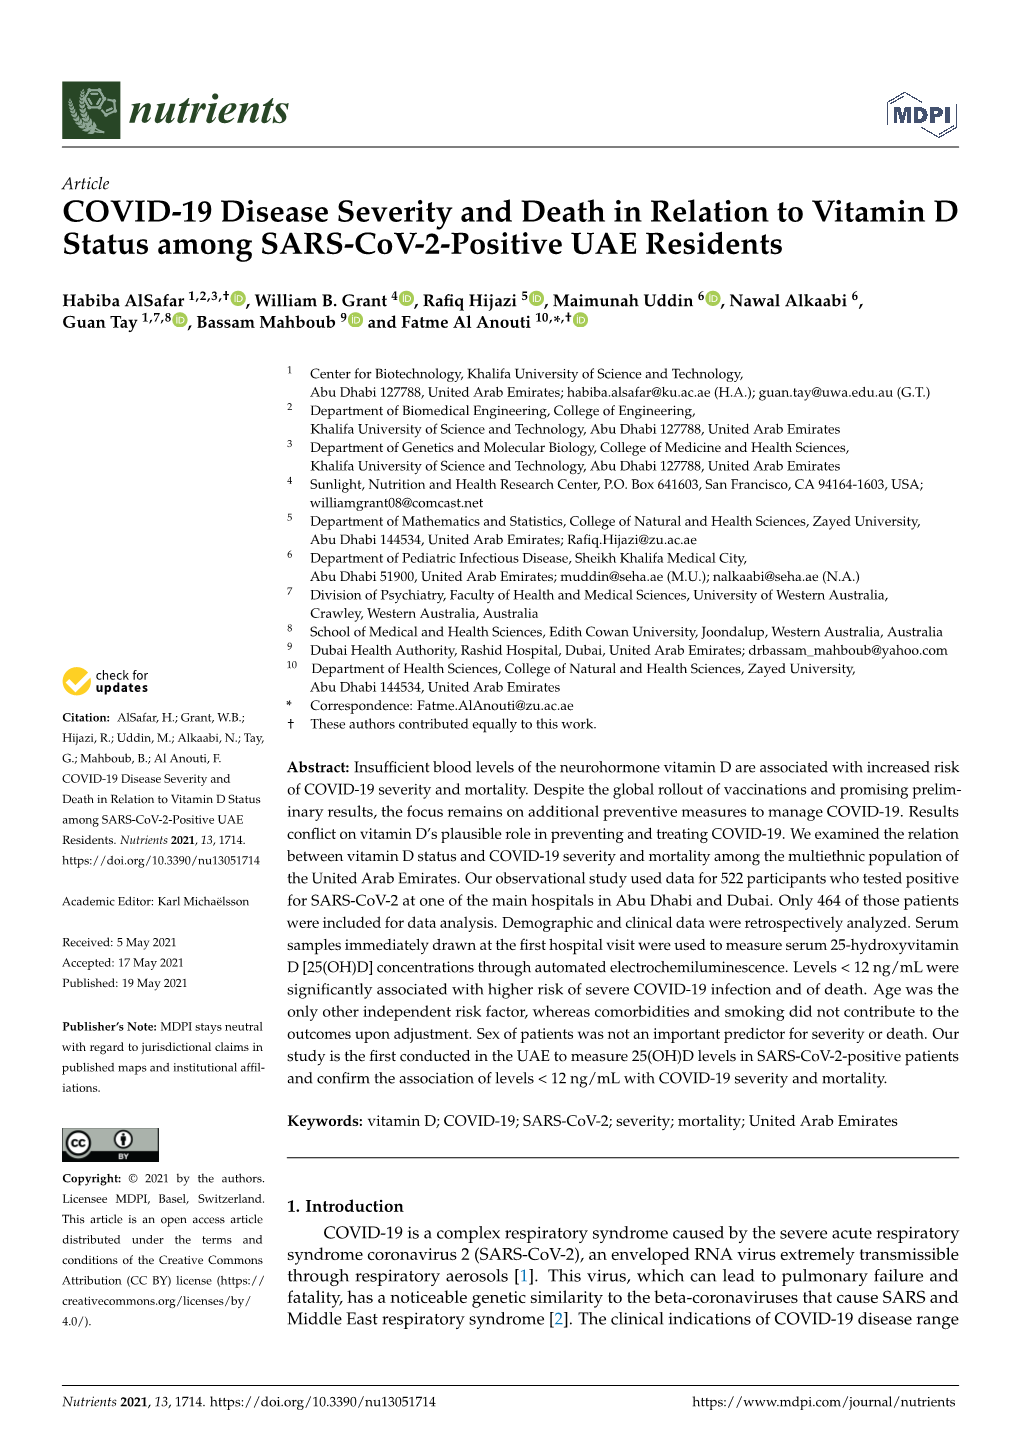 COVID-19 Disease Severity and Death in Relation to Vitamin D Status Among SARS-Cov-2-Positive UAE Residents